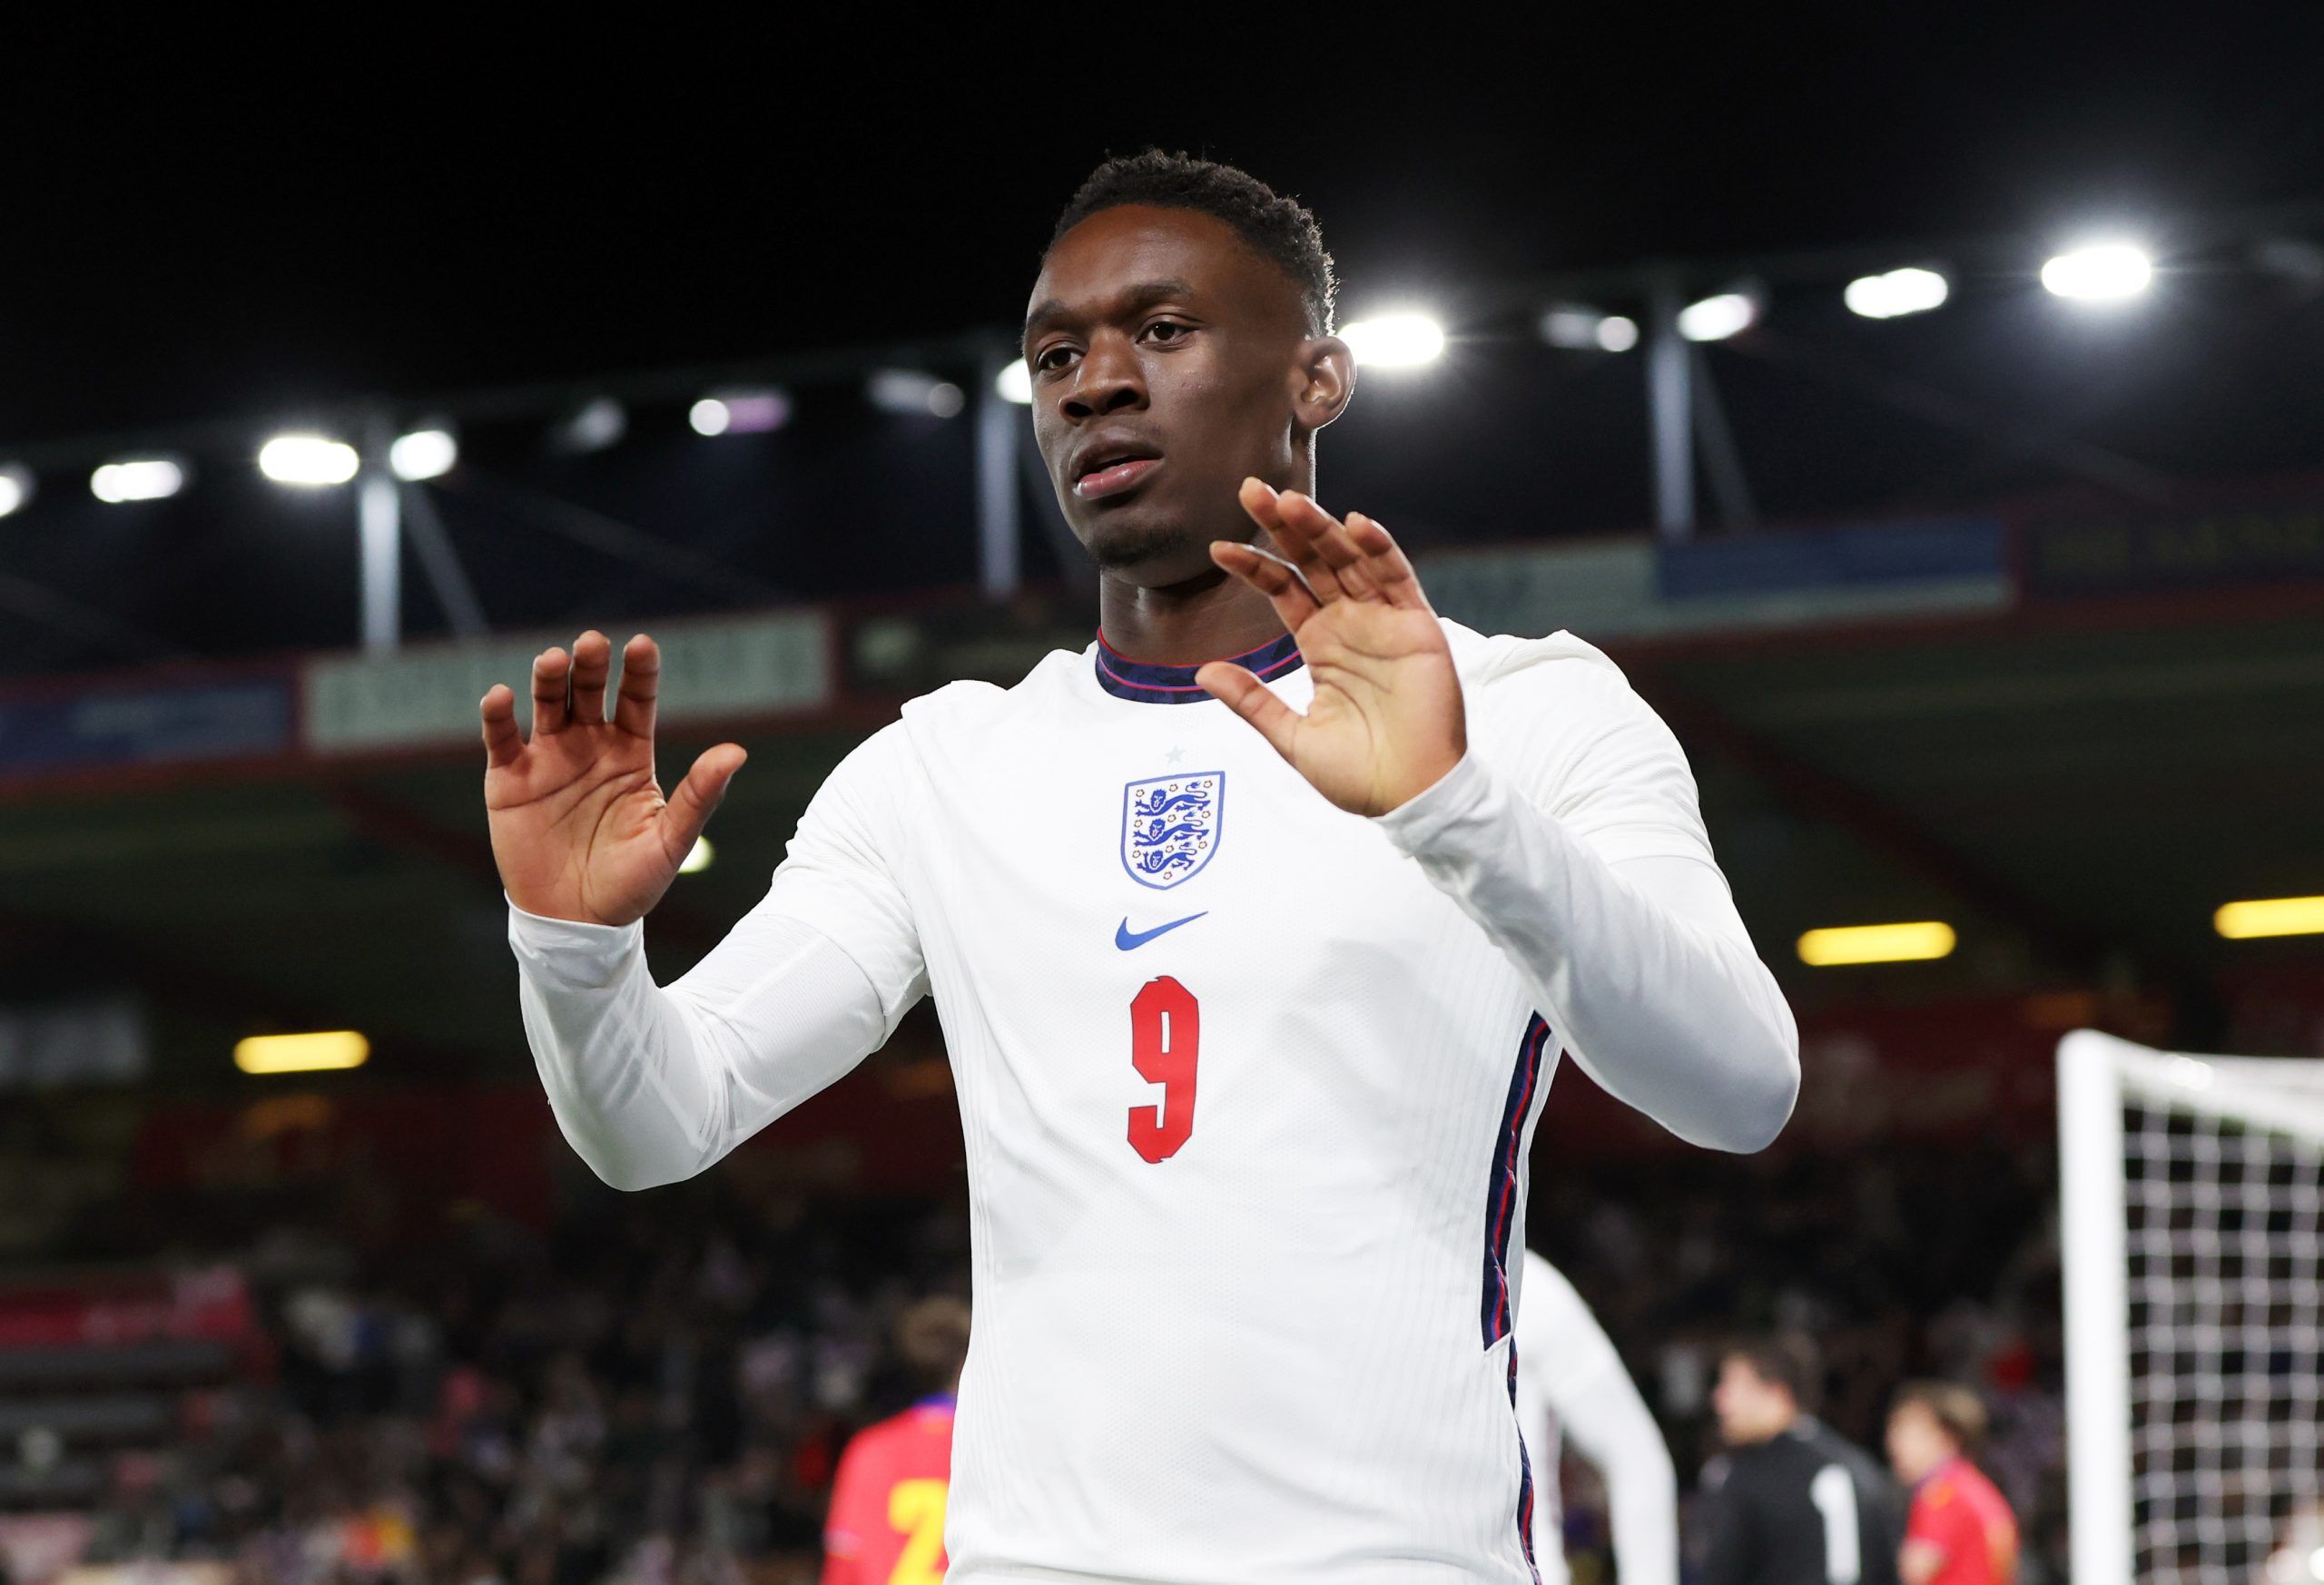 Soccer Football - European Under-21 Championship Qualifiers - England v Andorra - Vitality Stadium, Bournemouth, Britain - March 25, 2022 England's Folarin Balogun celebrates scoring their first goal Action Images via Reuters/Paul Childs